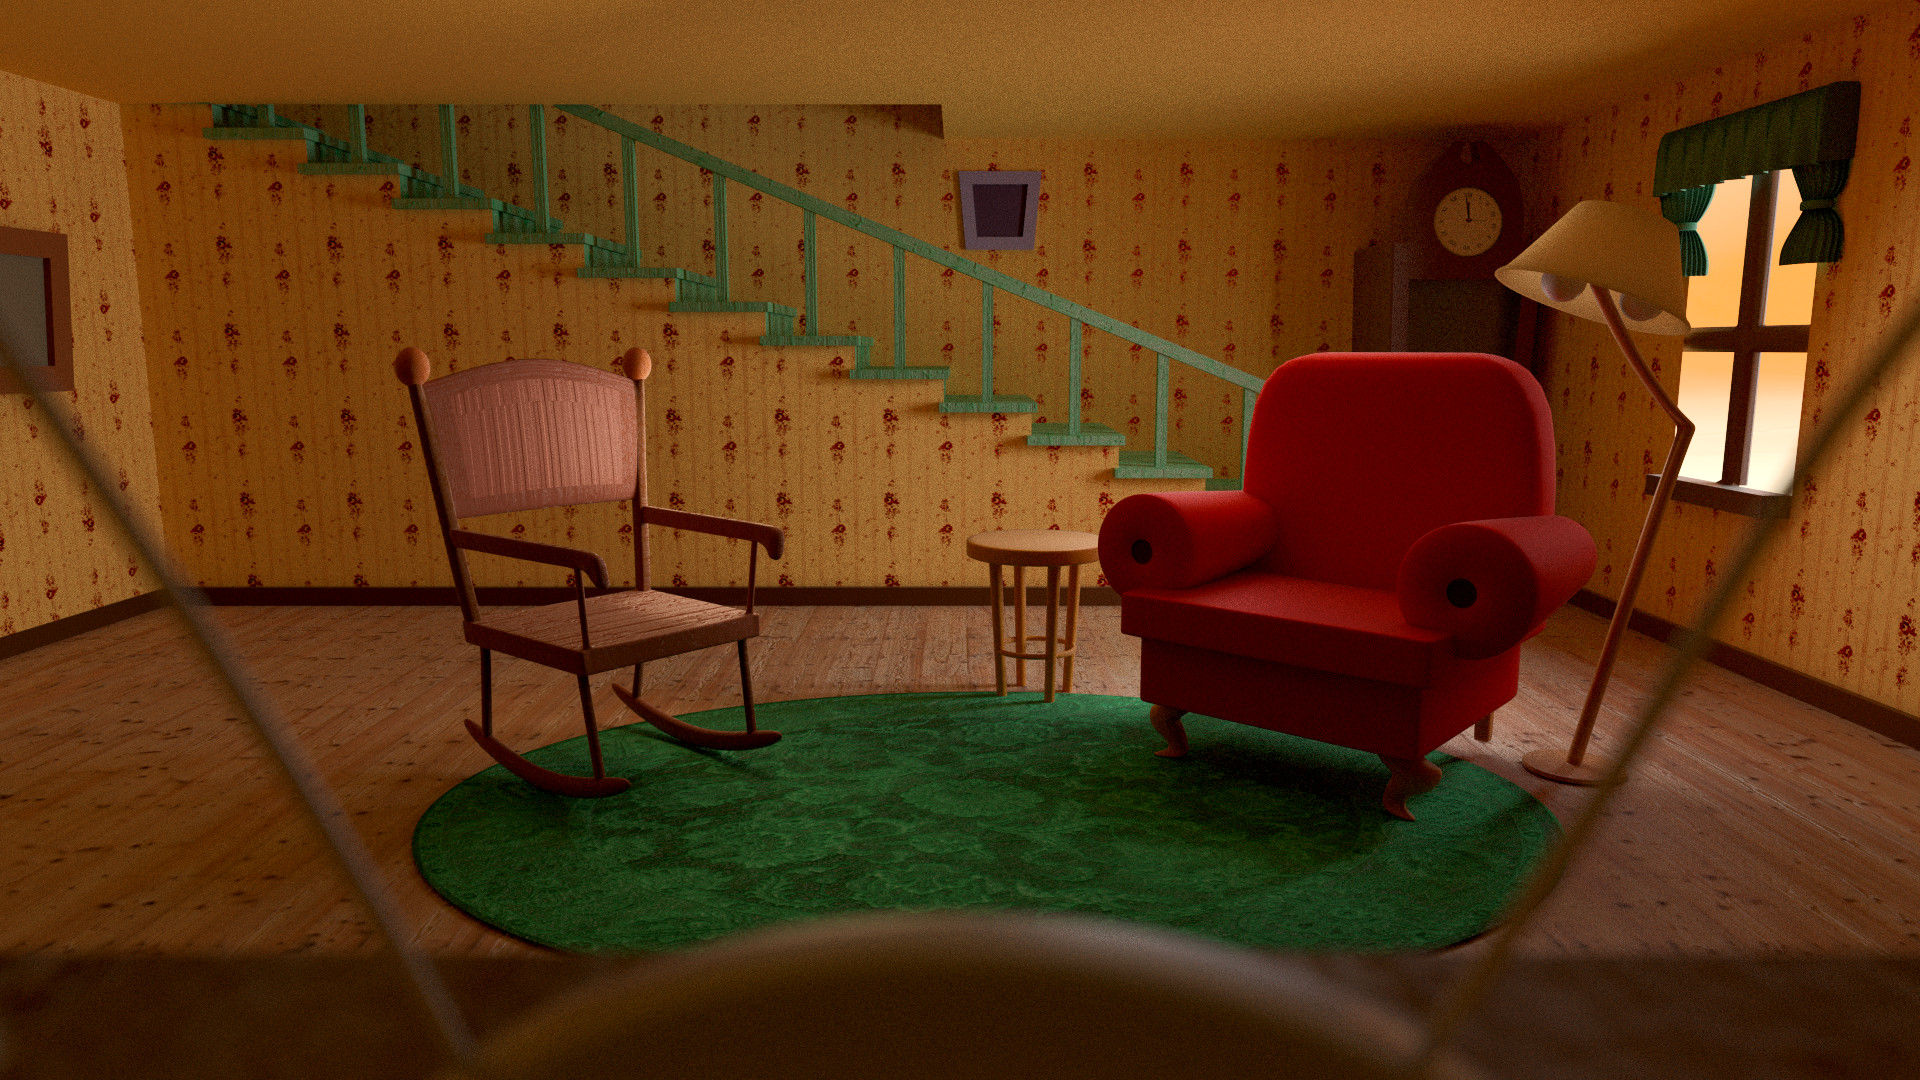 1920x1080 I Made the Living Room from "Courage the Cowardly Dog" ...